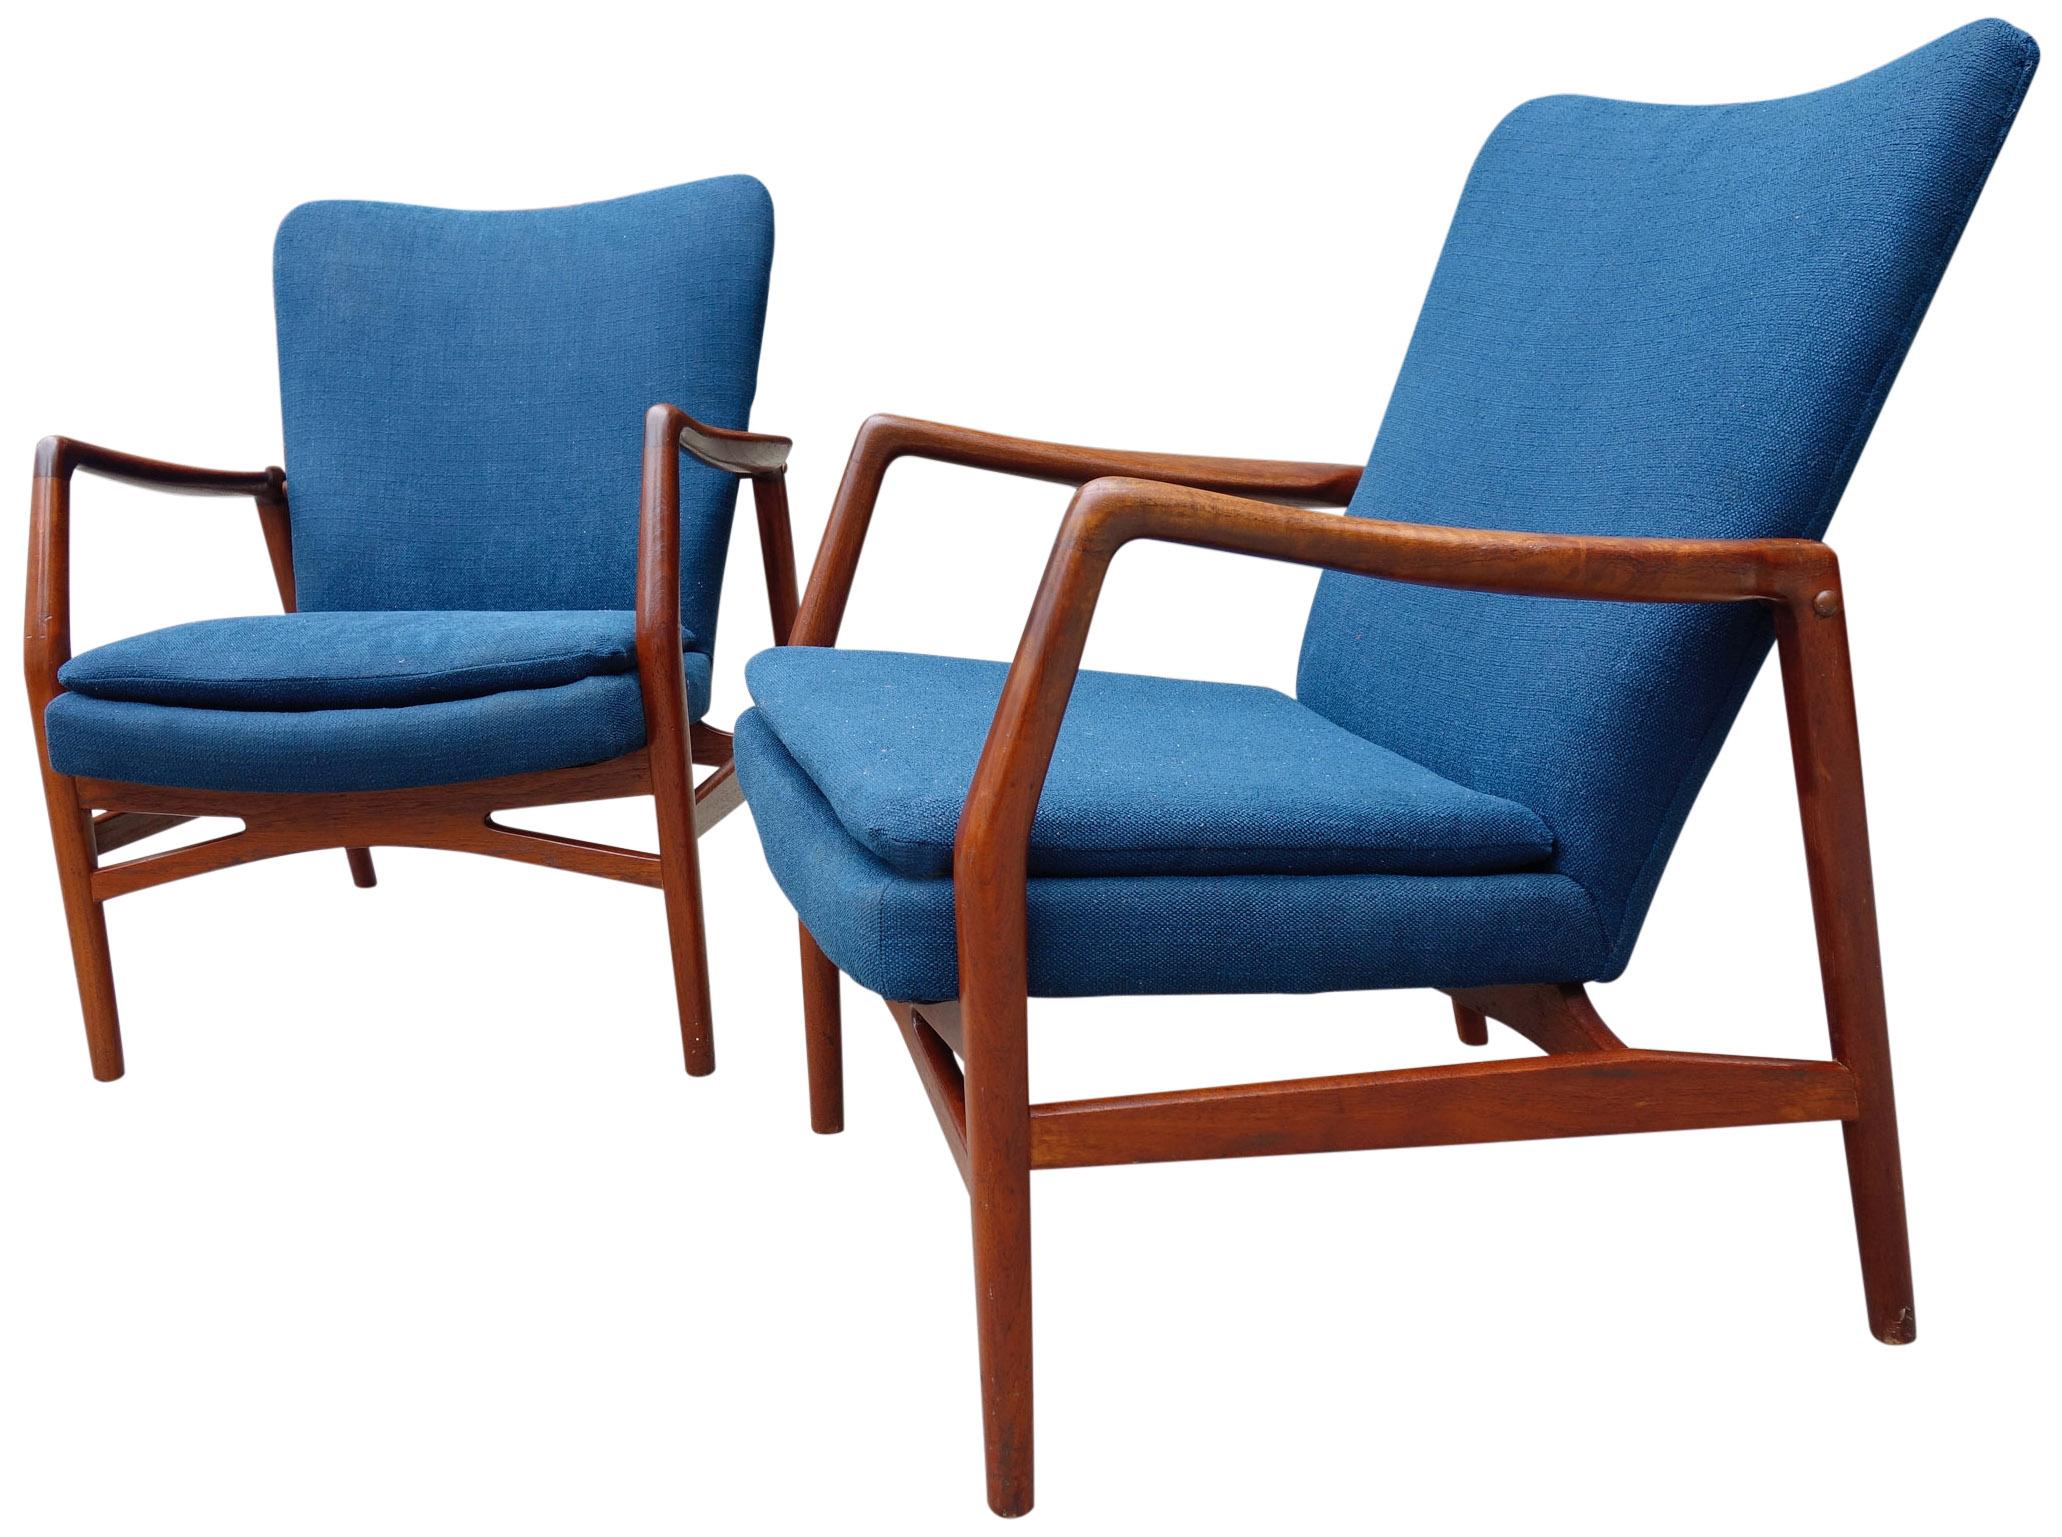 Danish Modern Kurt Olsen Model 215 wing back chairs for Slagelse Møbelvaerk. The frames are in wonderful condition showing a rich warm patina. Newly recovered in blue fabric.